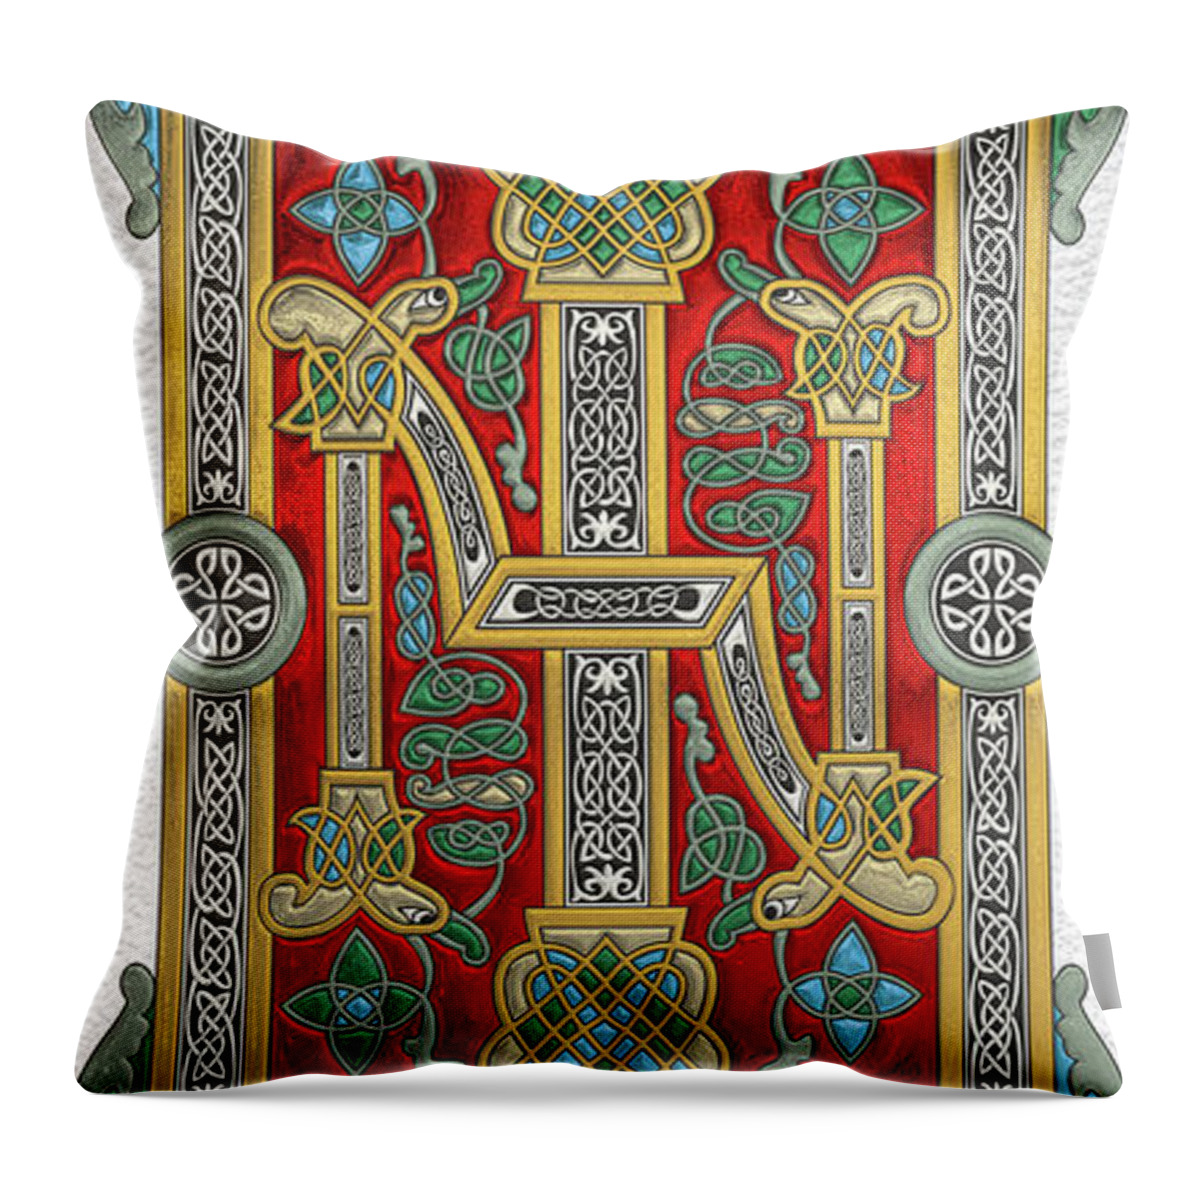 ‘celtic Treasures’ Collection By Serge Averbukh Throw Pillow featuring the digital art Ancient Celtic Runes of Hospitality and Potential - Illuminated Plate over White Leather by Serge Averbukh